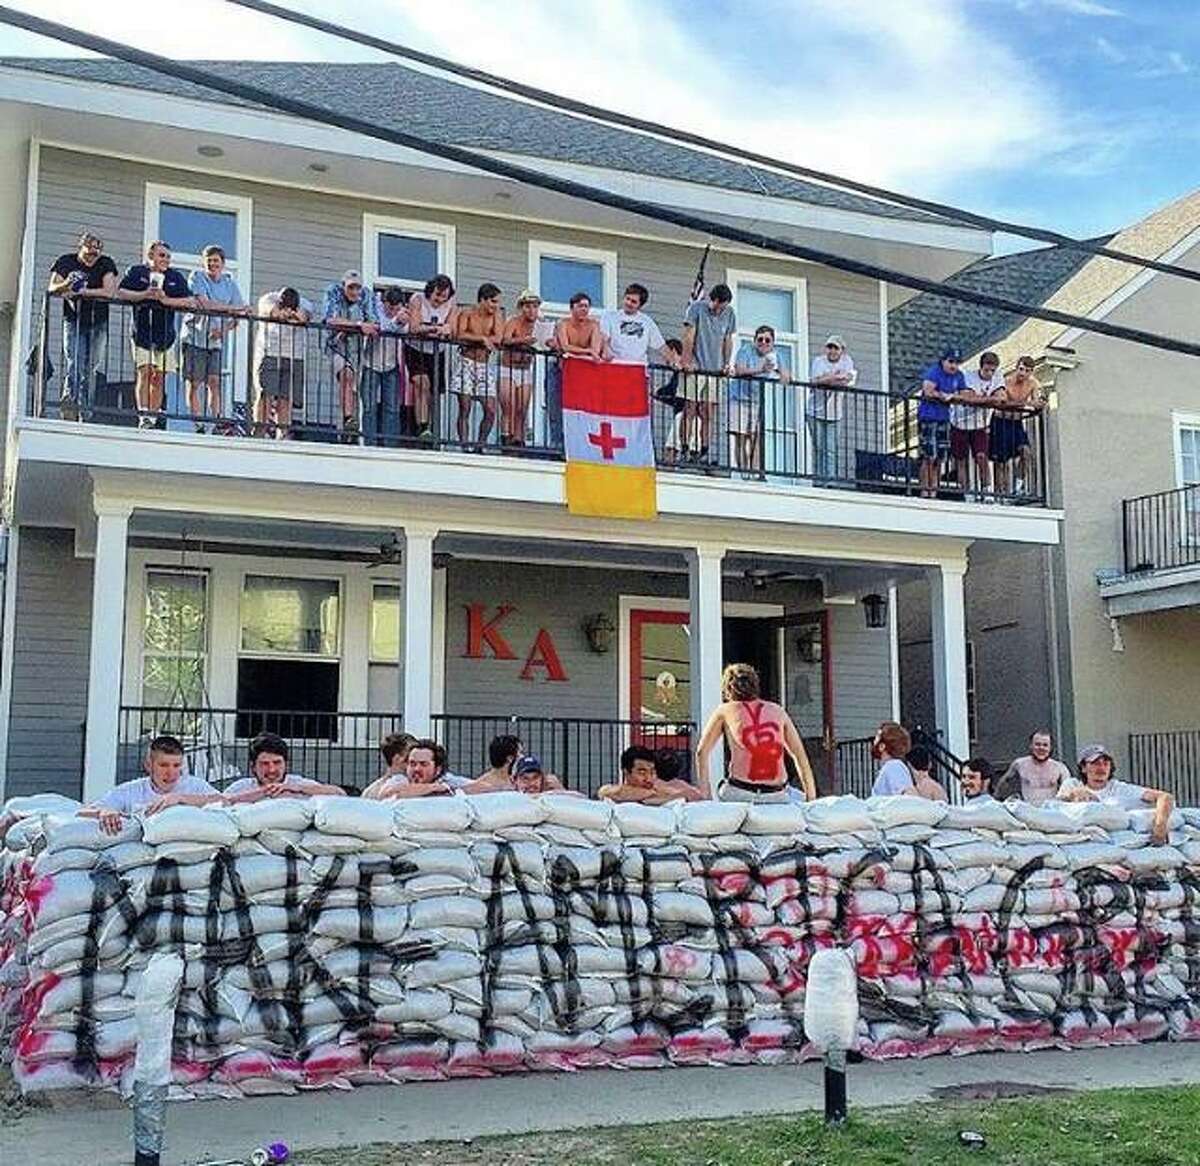 Tulane fraternity builds crude wall house that 'Make Great Again'